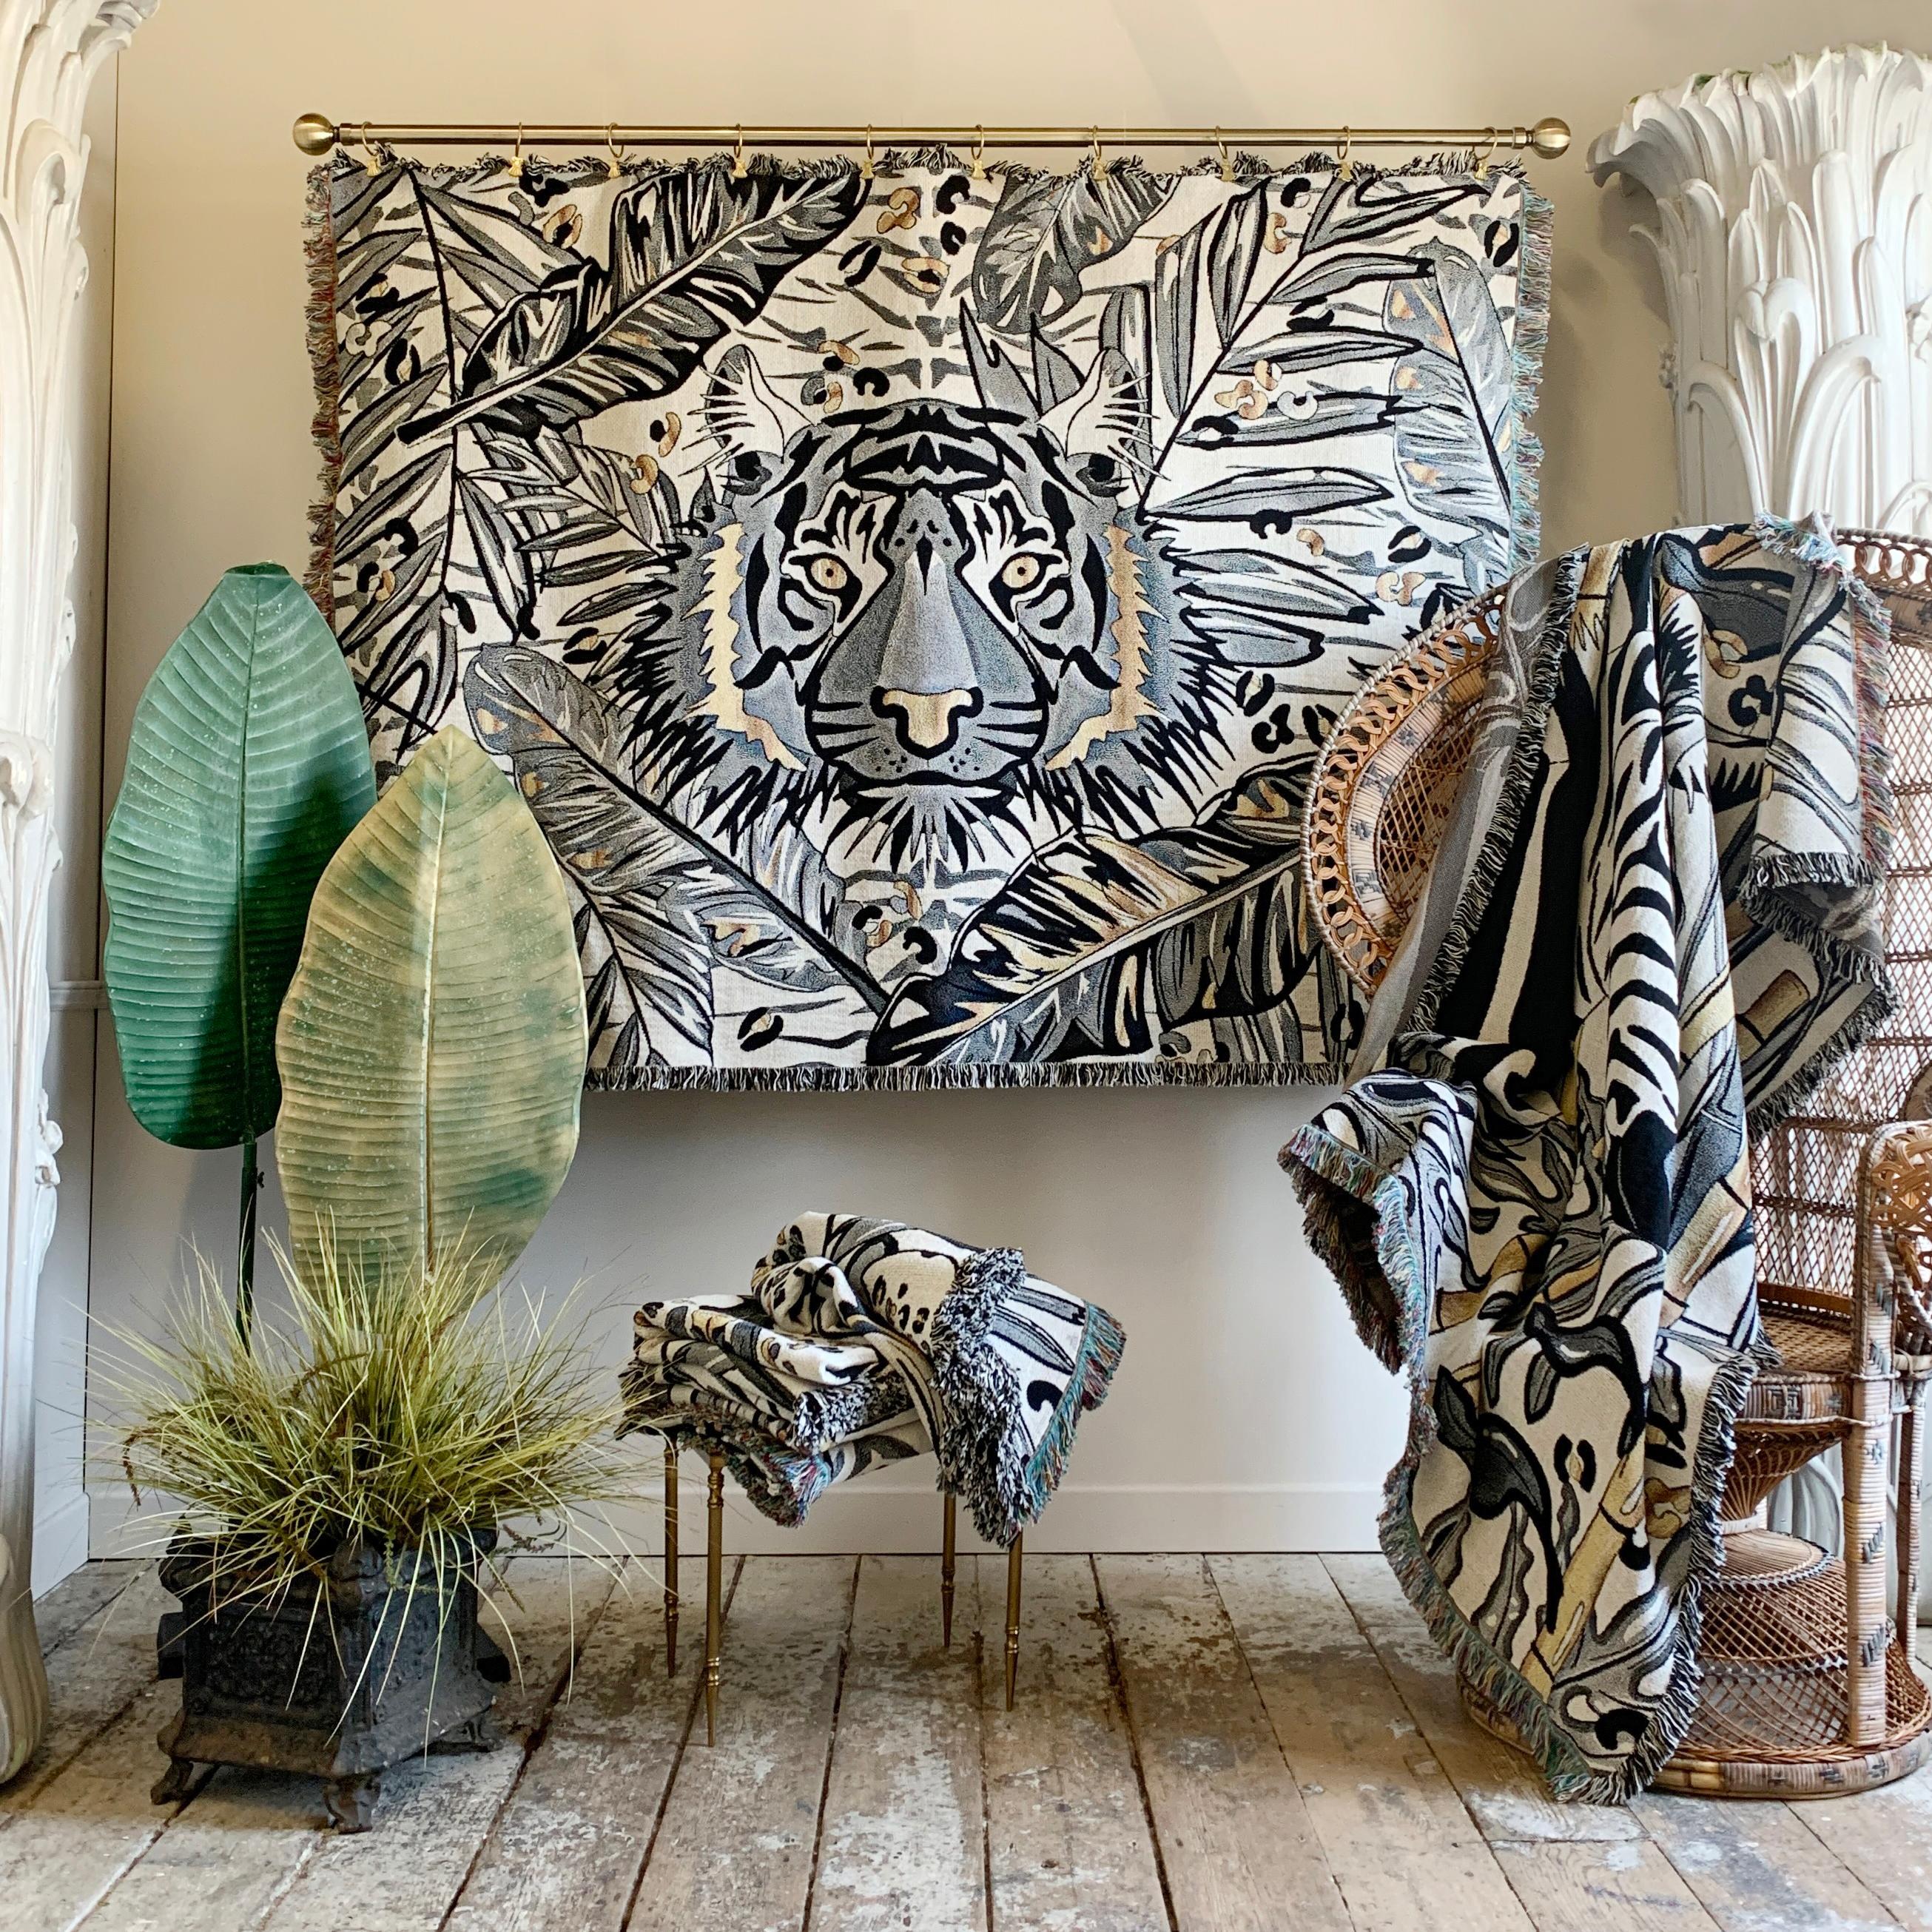 The Tropics Collection 'Tiger' woven recycled cotton throw 

As a throw, blanket, draped or a wall hung, this luxuriously versatile woven throw will create a bold statement in any interior.

Beautiful and Versatile, our Tiger woven throw can be